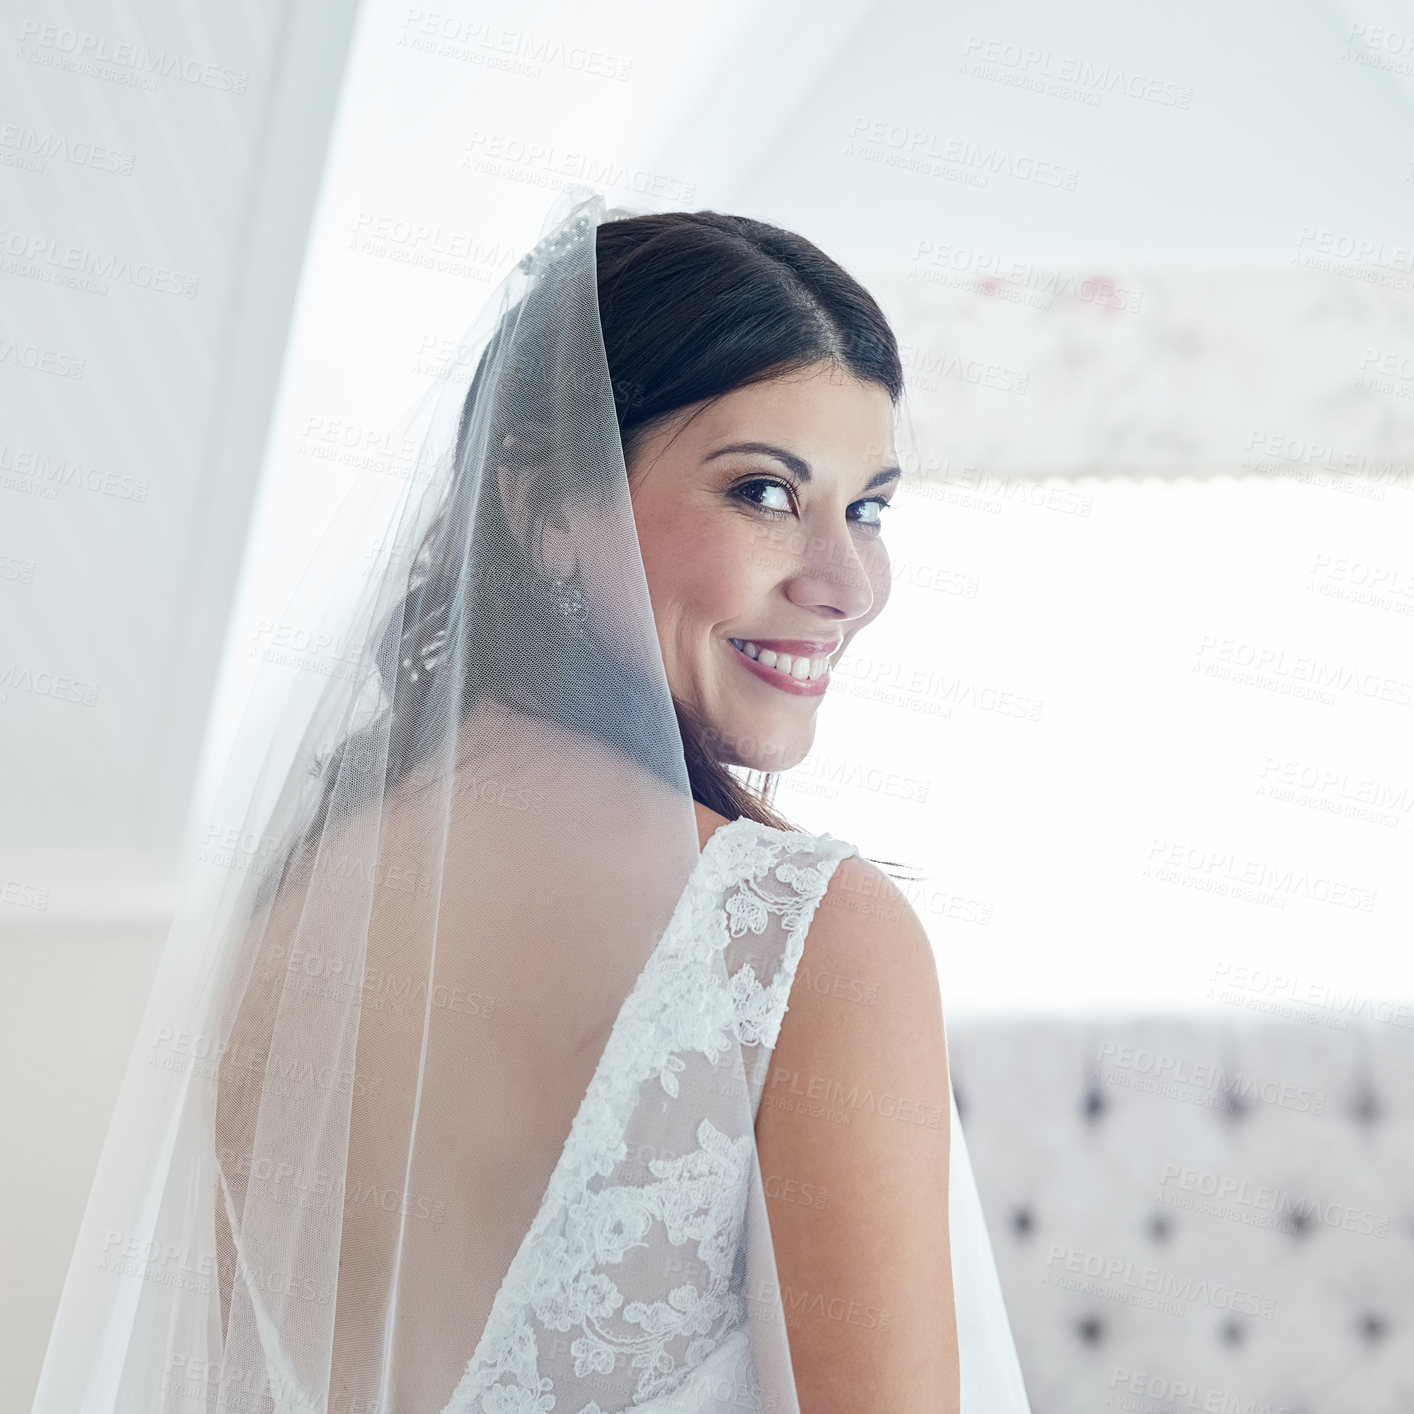 Buy stock photo Cropped shot of an attractive young bride on her wedding day